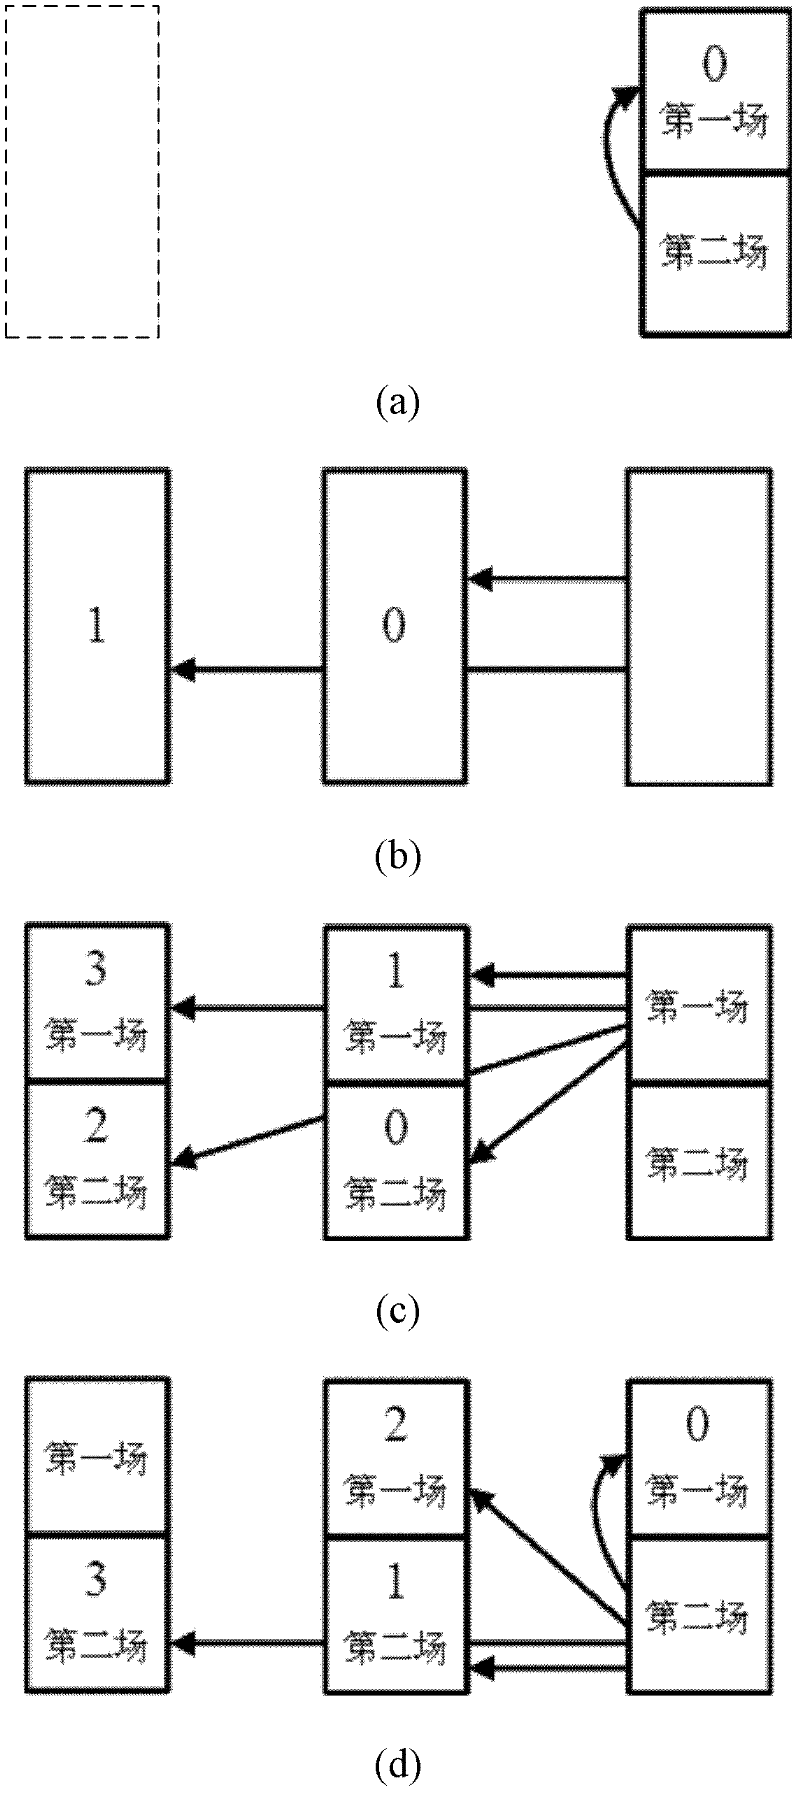 Method for selecting reference field and acquiring time-domain motion vector